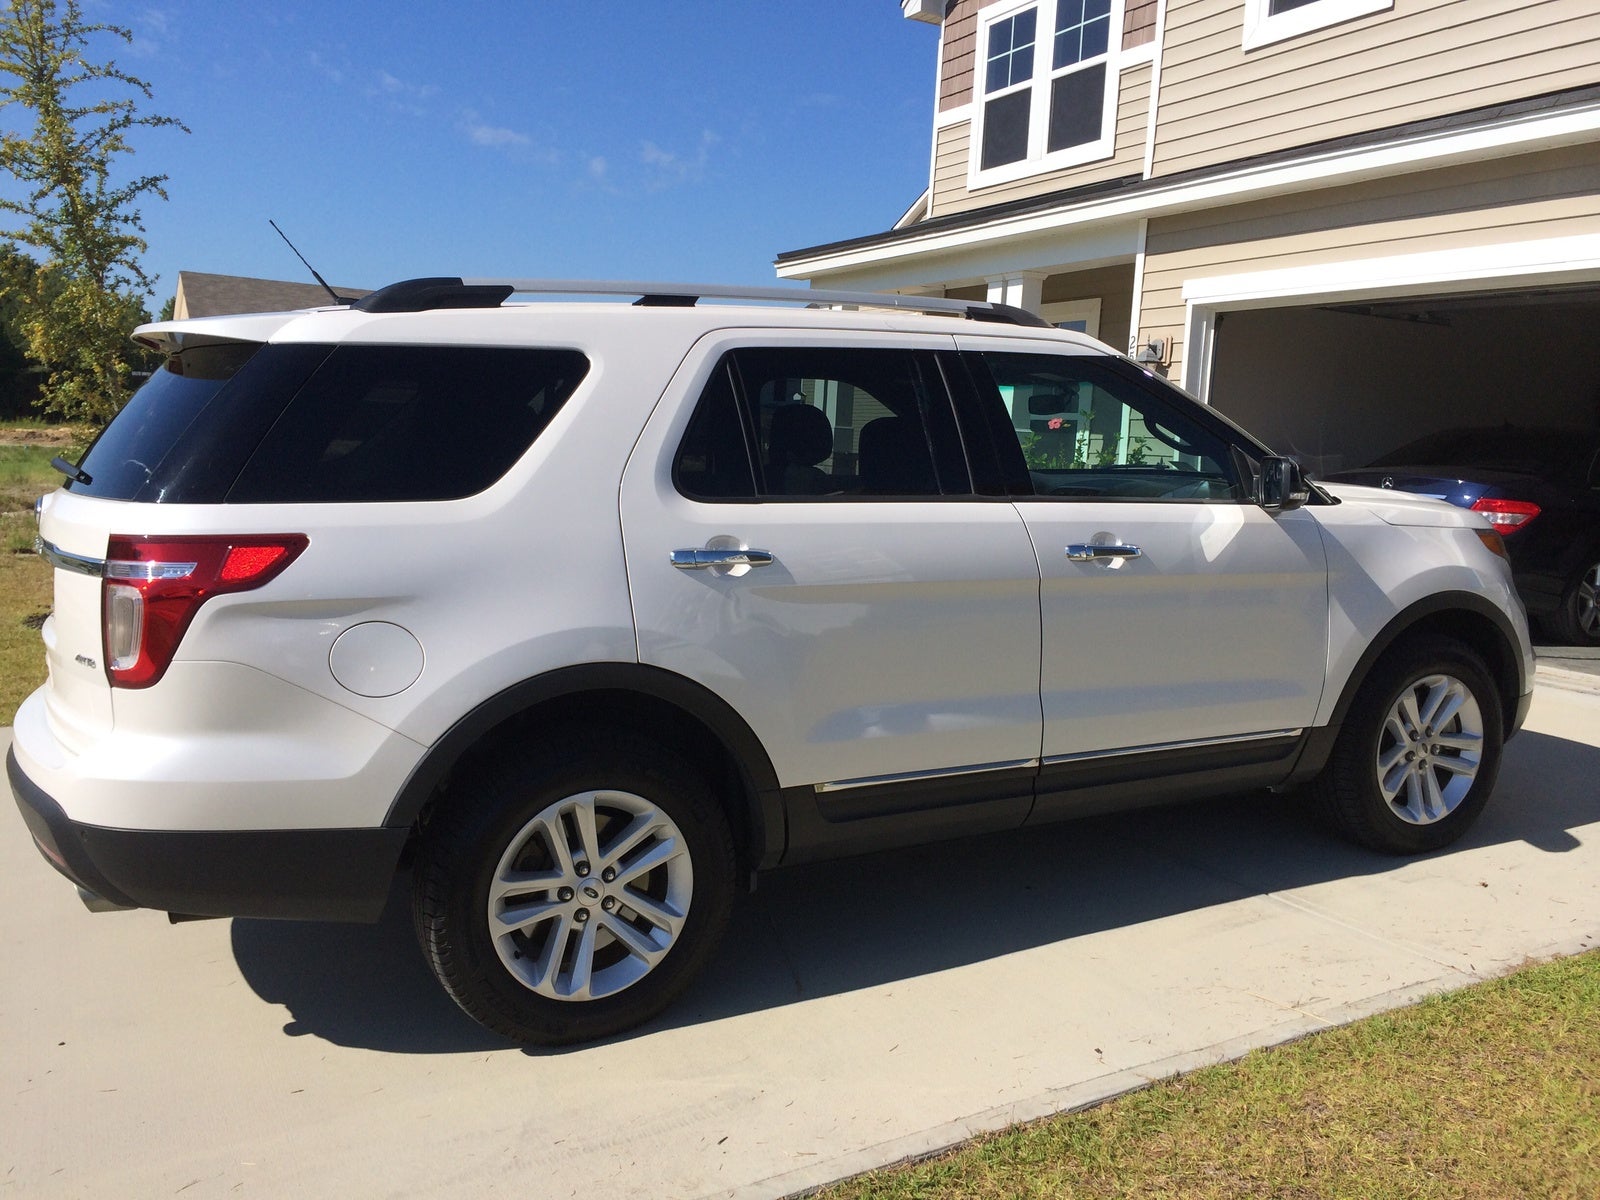 New 2015 \/ 2016 Ford Explorer For Sale  CarGurus